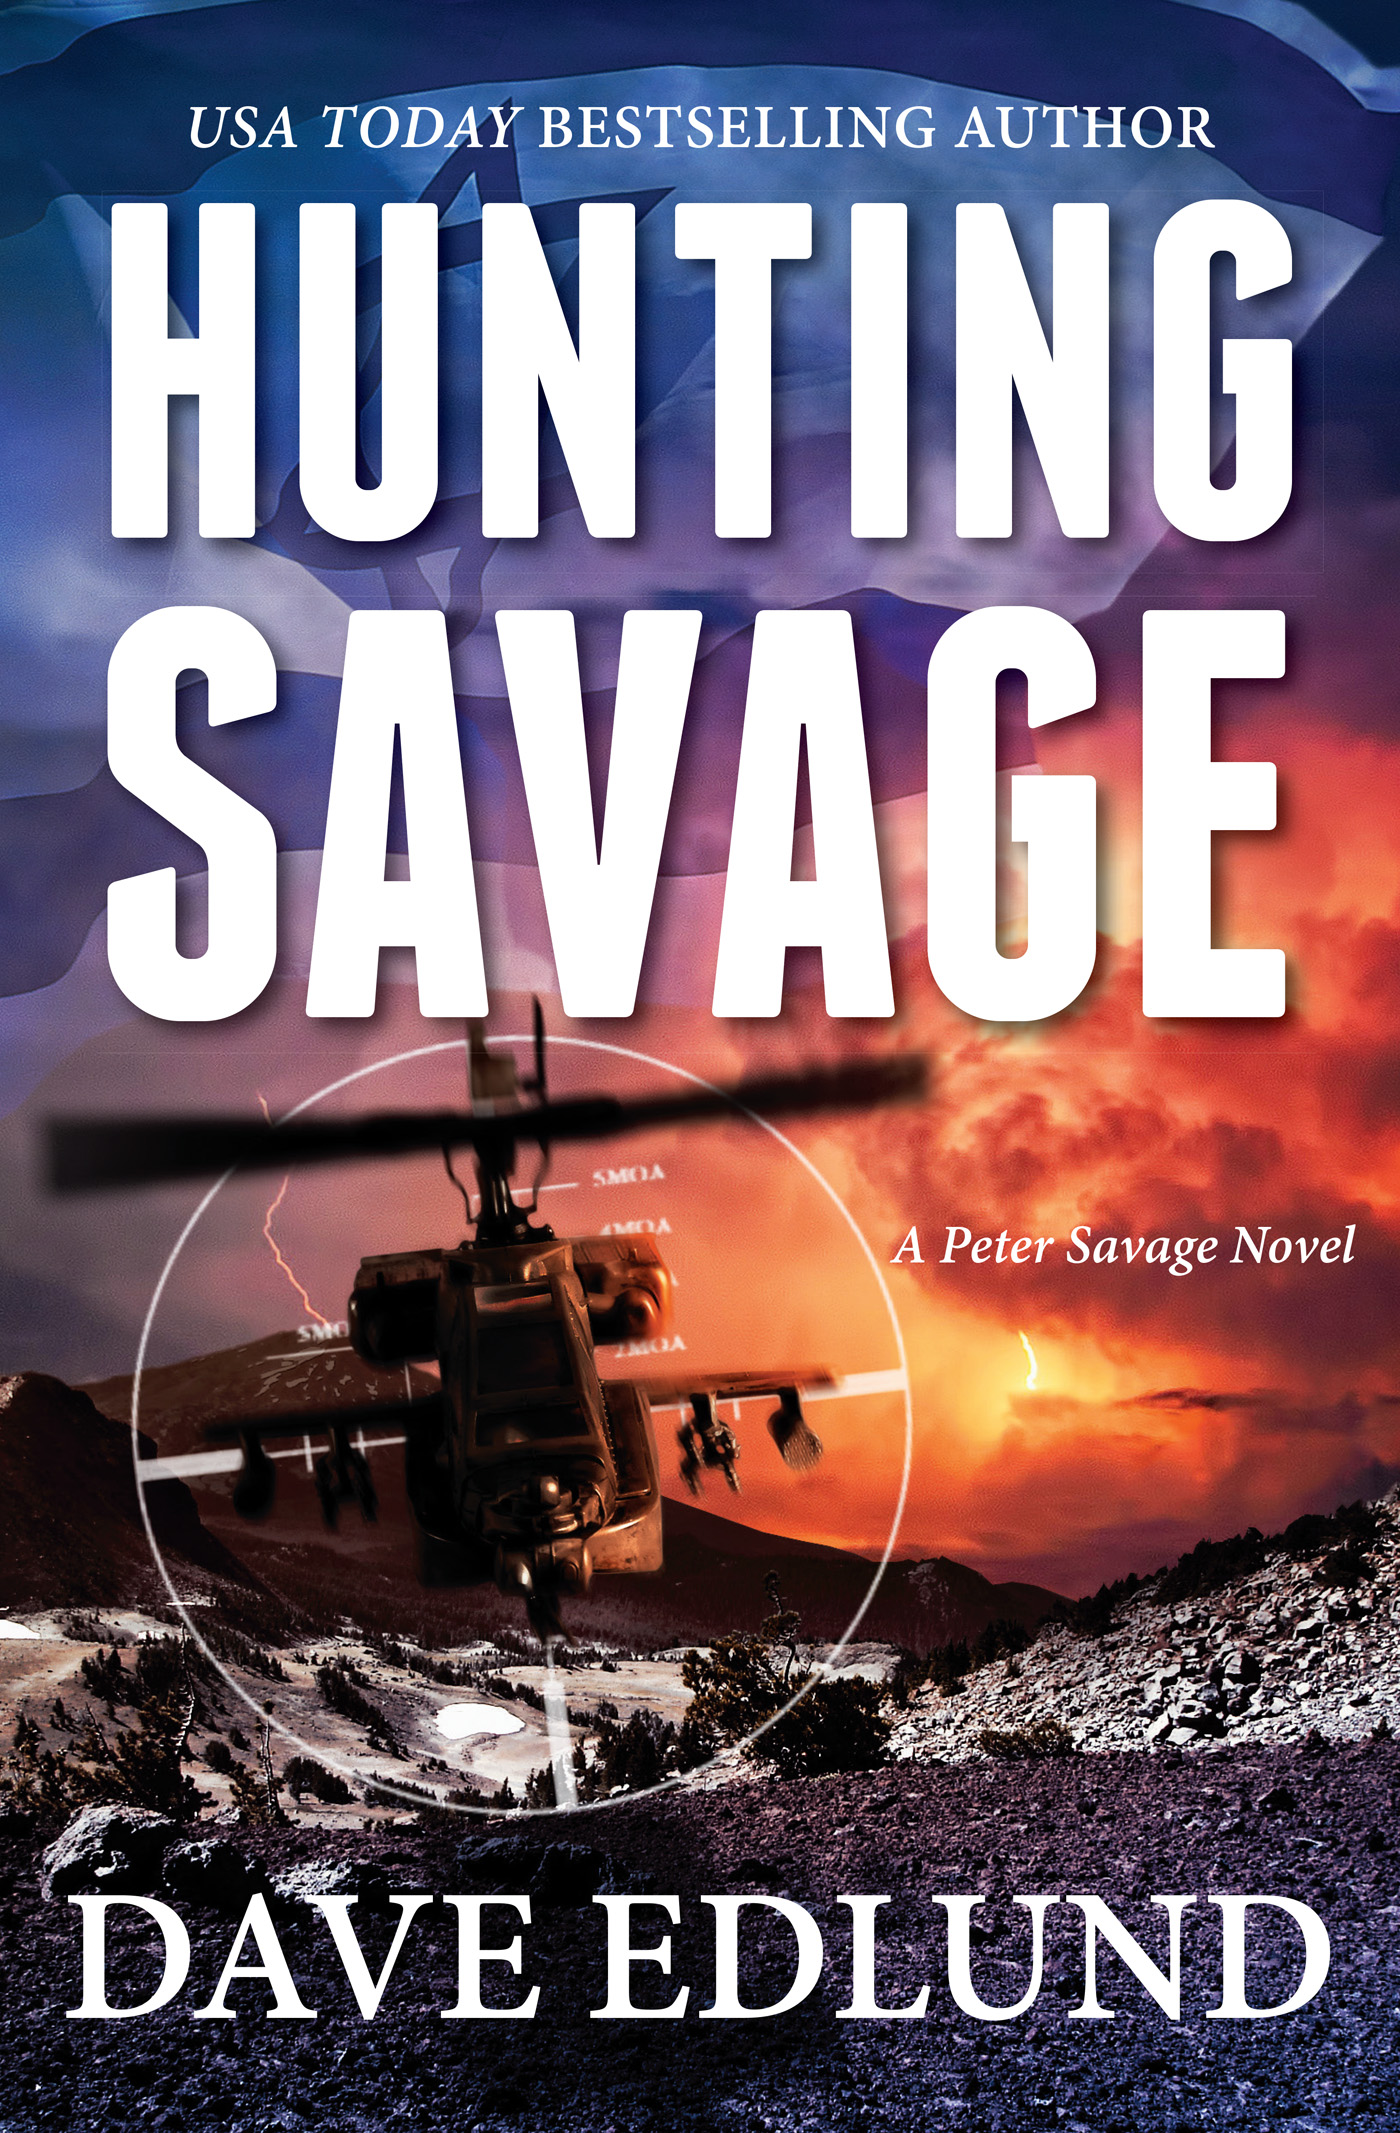 This image is the cover for the book Hunting Savage, Peter Savage